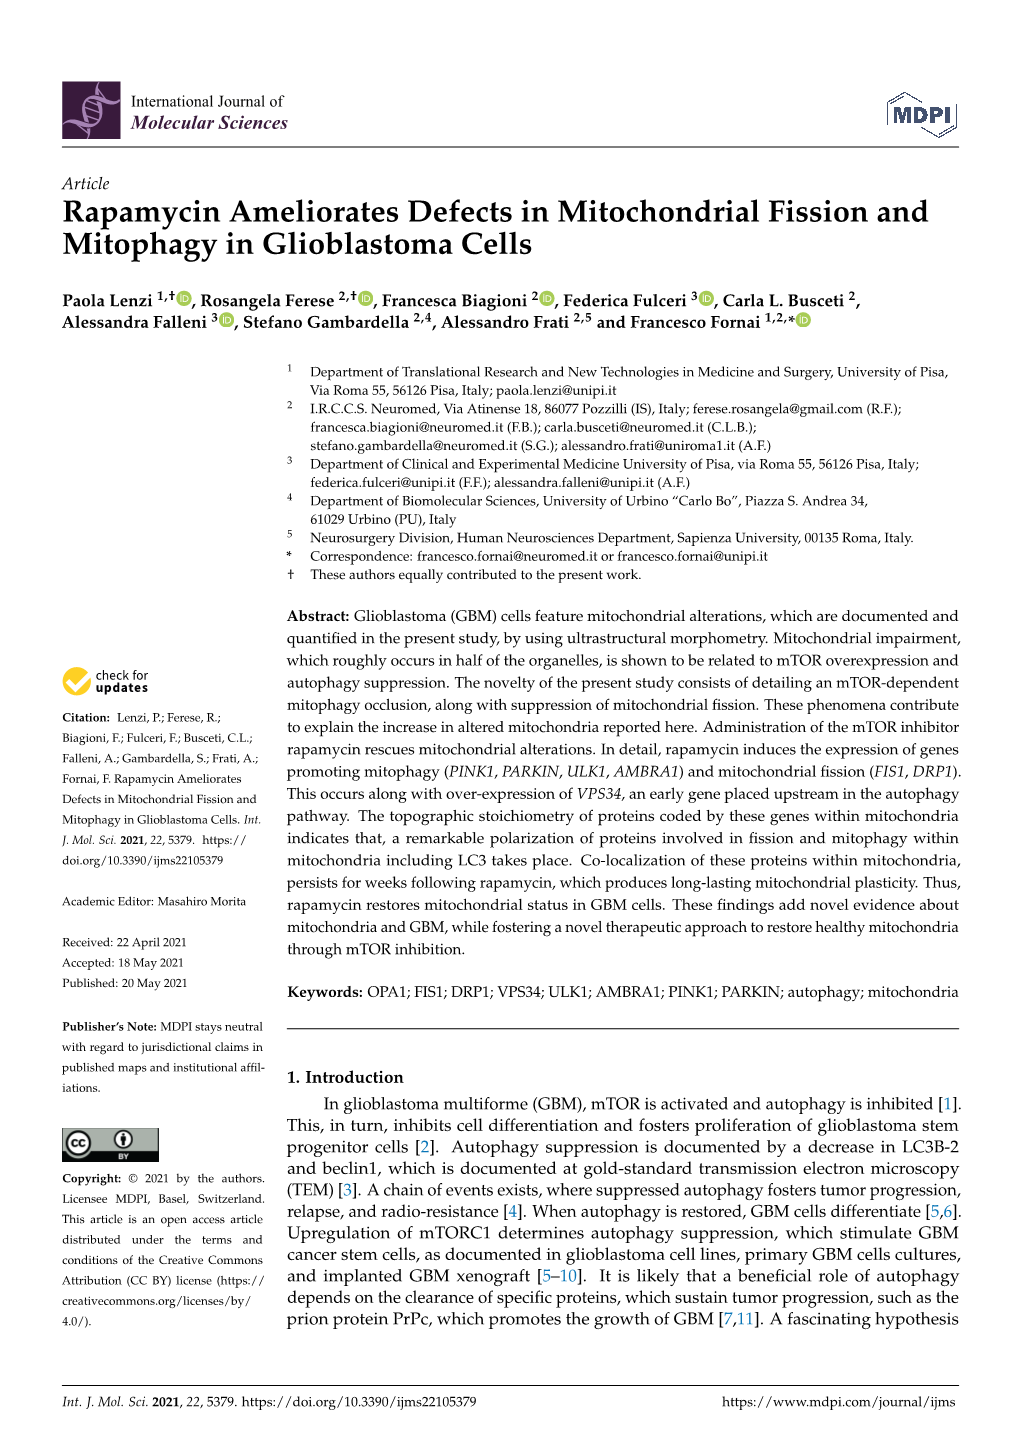 Rapamycin Ameliorates Defects in Mitochondrial Fission and Mitophagy in Glioblastoma Cells